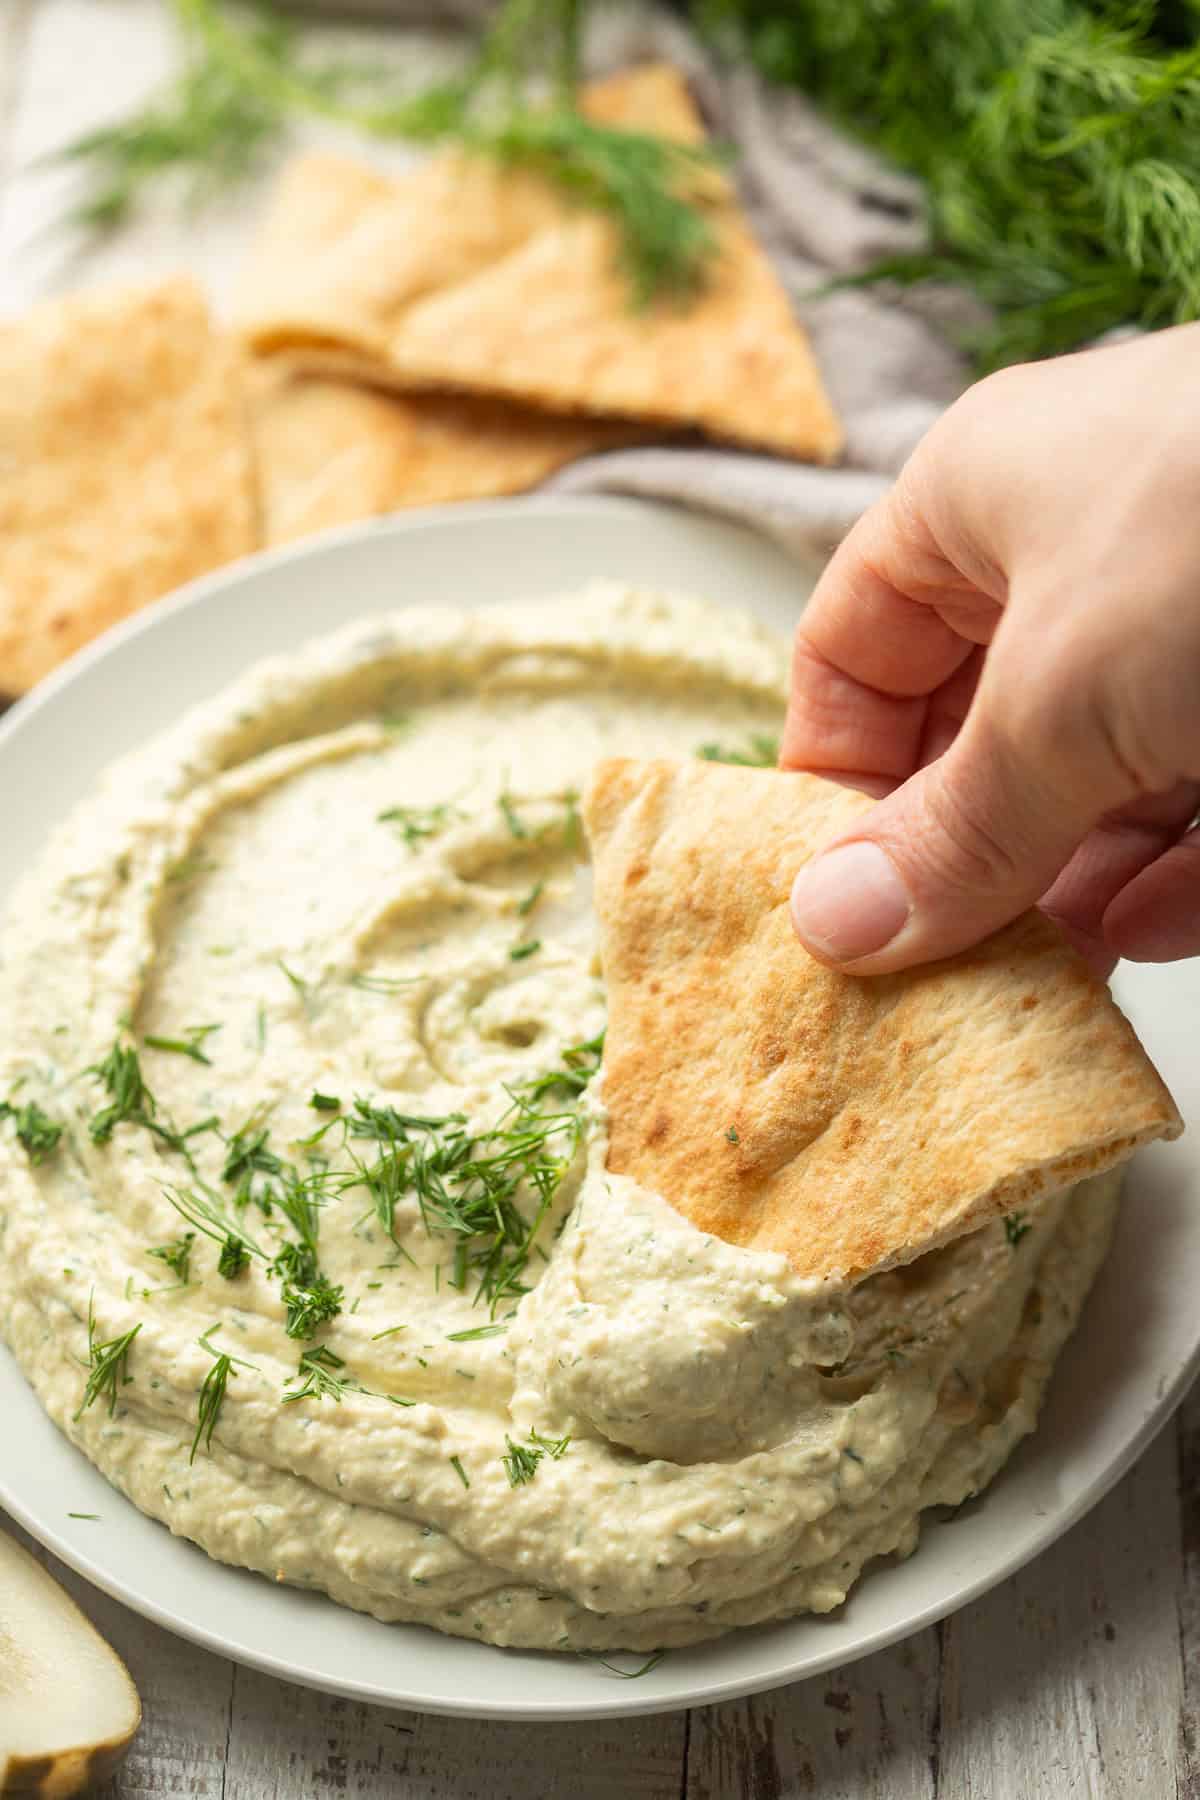 Hand dipping a pita wedge into a plate of Dill Pickle Hummus.